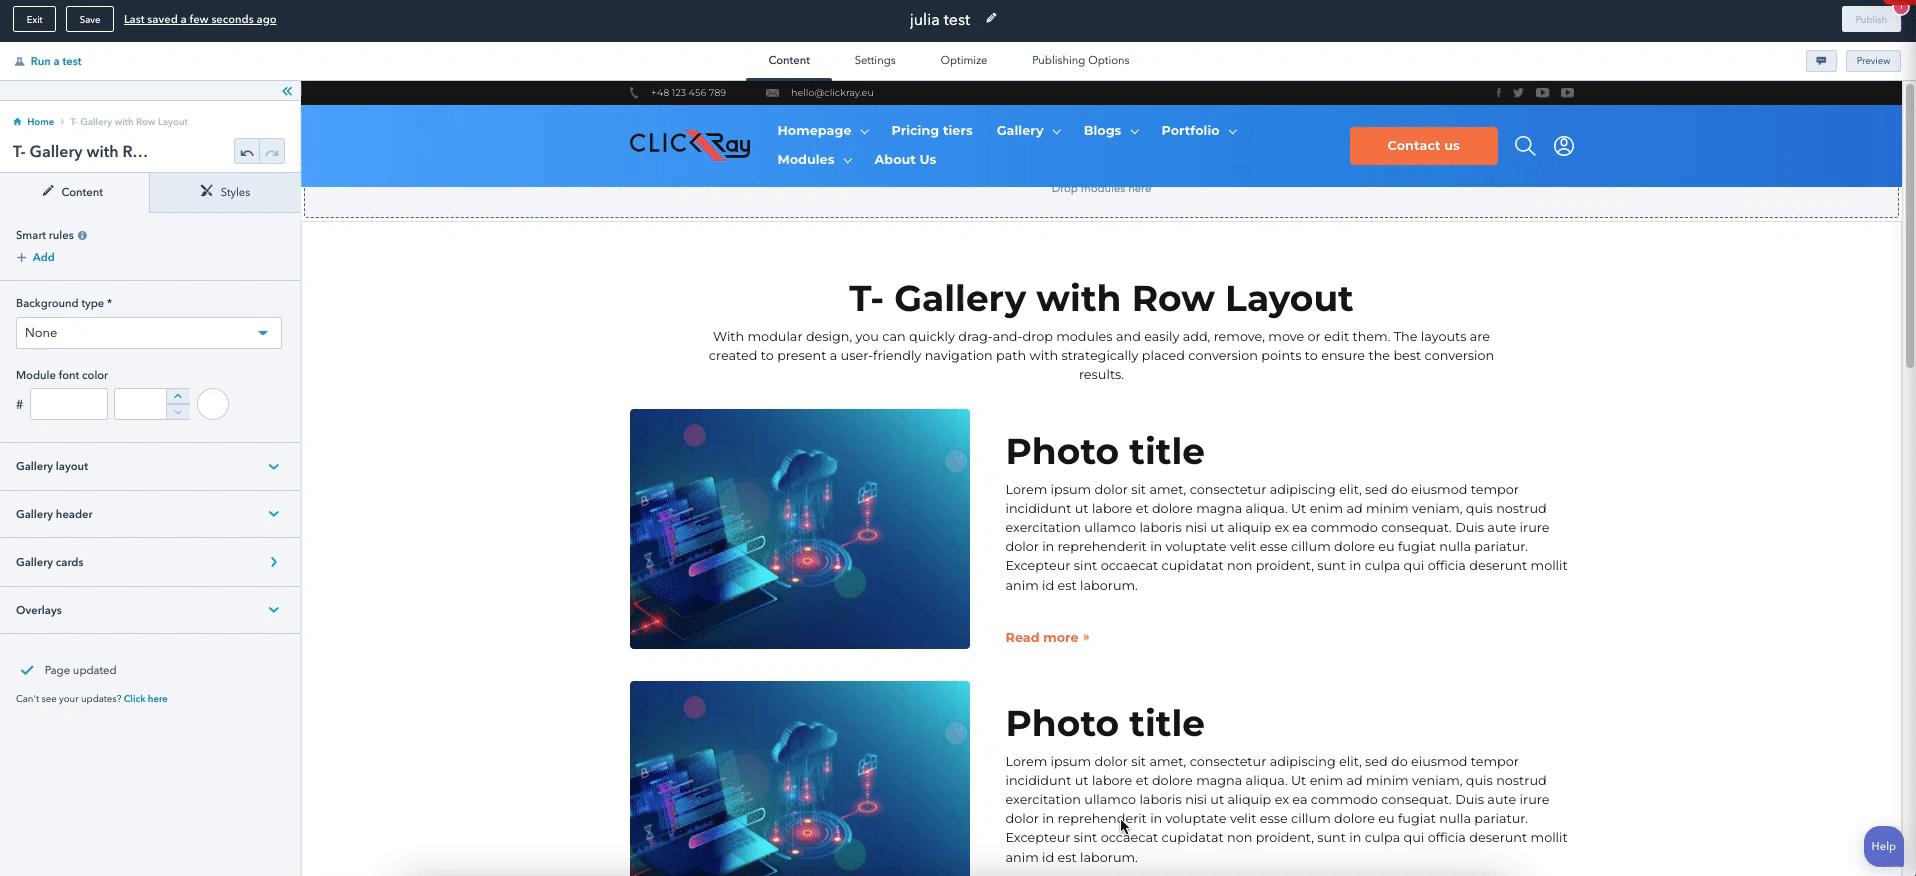 T- Gallery with Row Layout